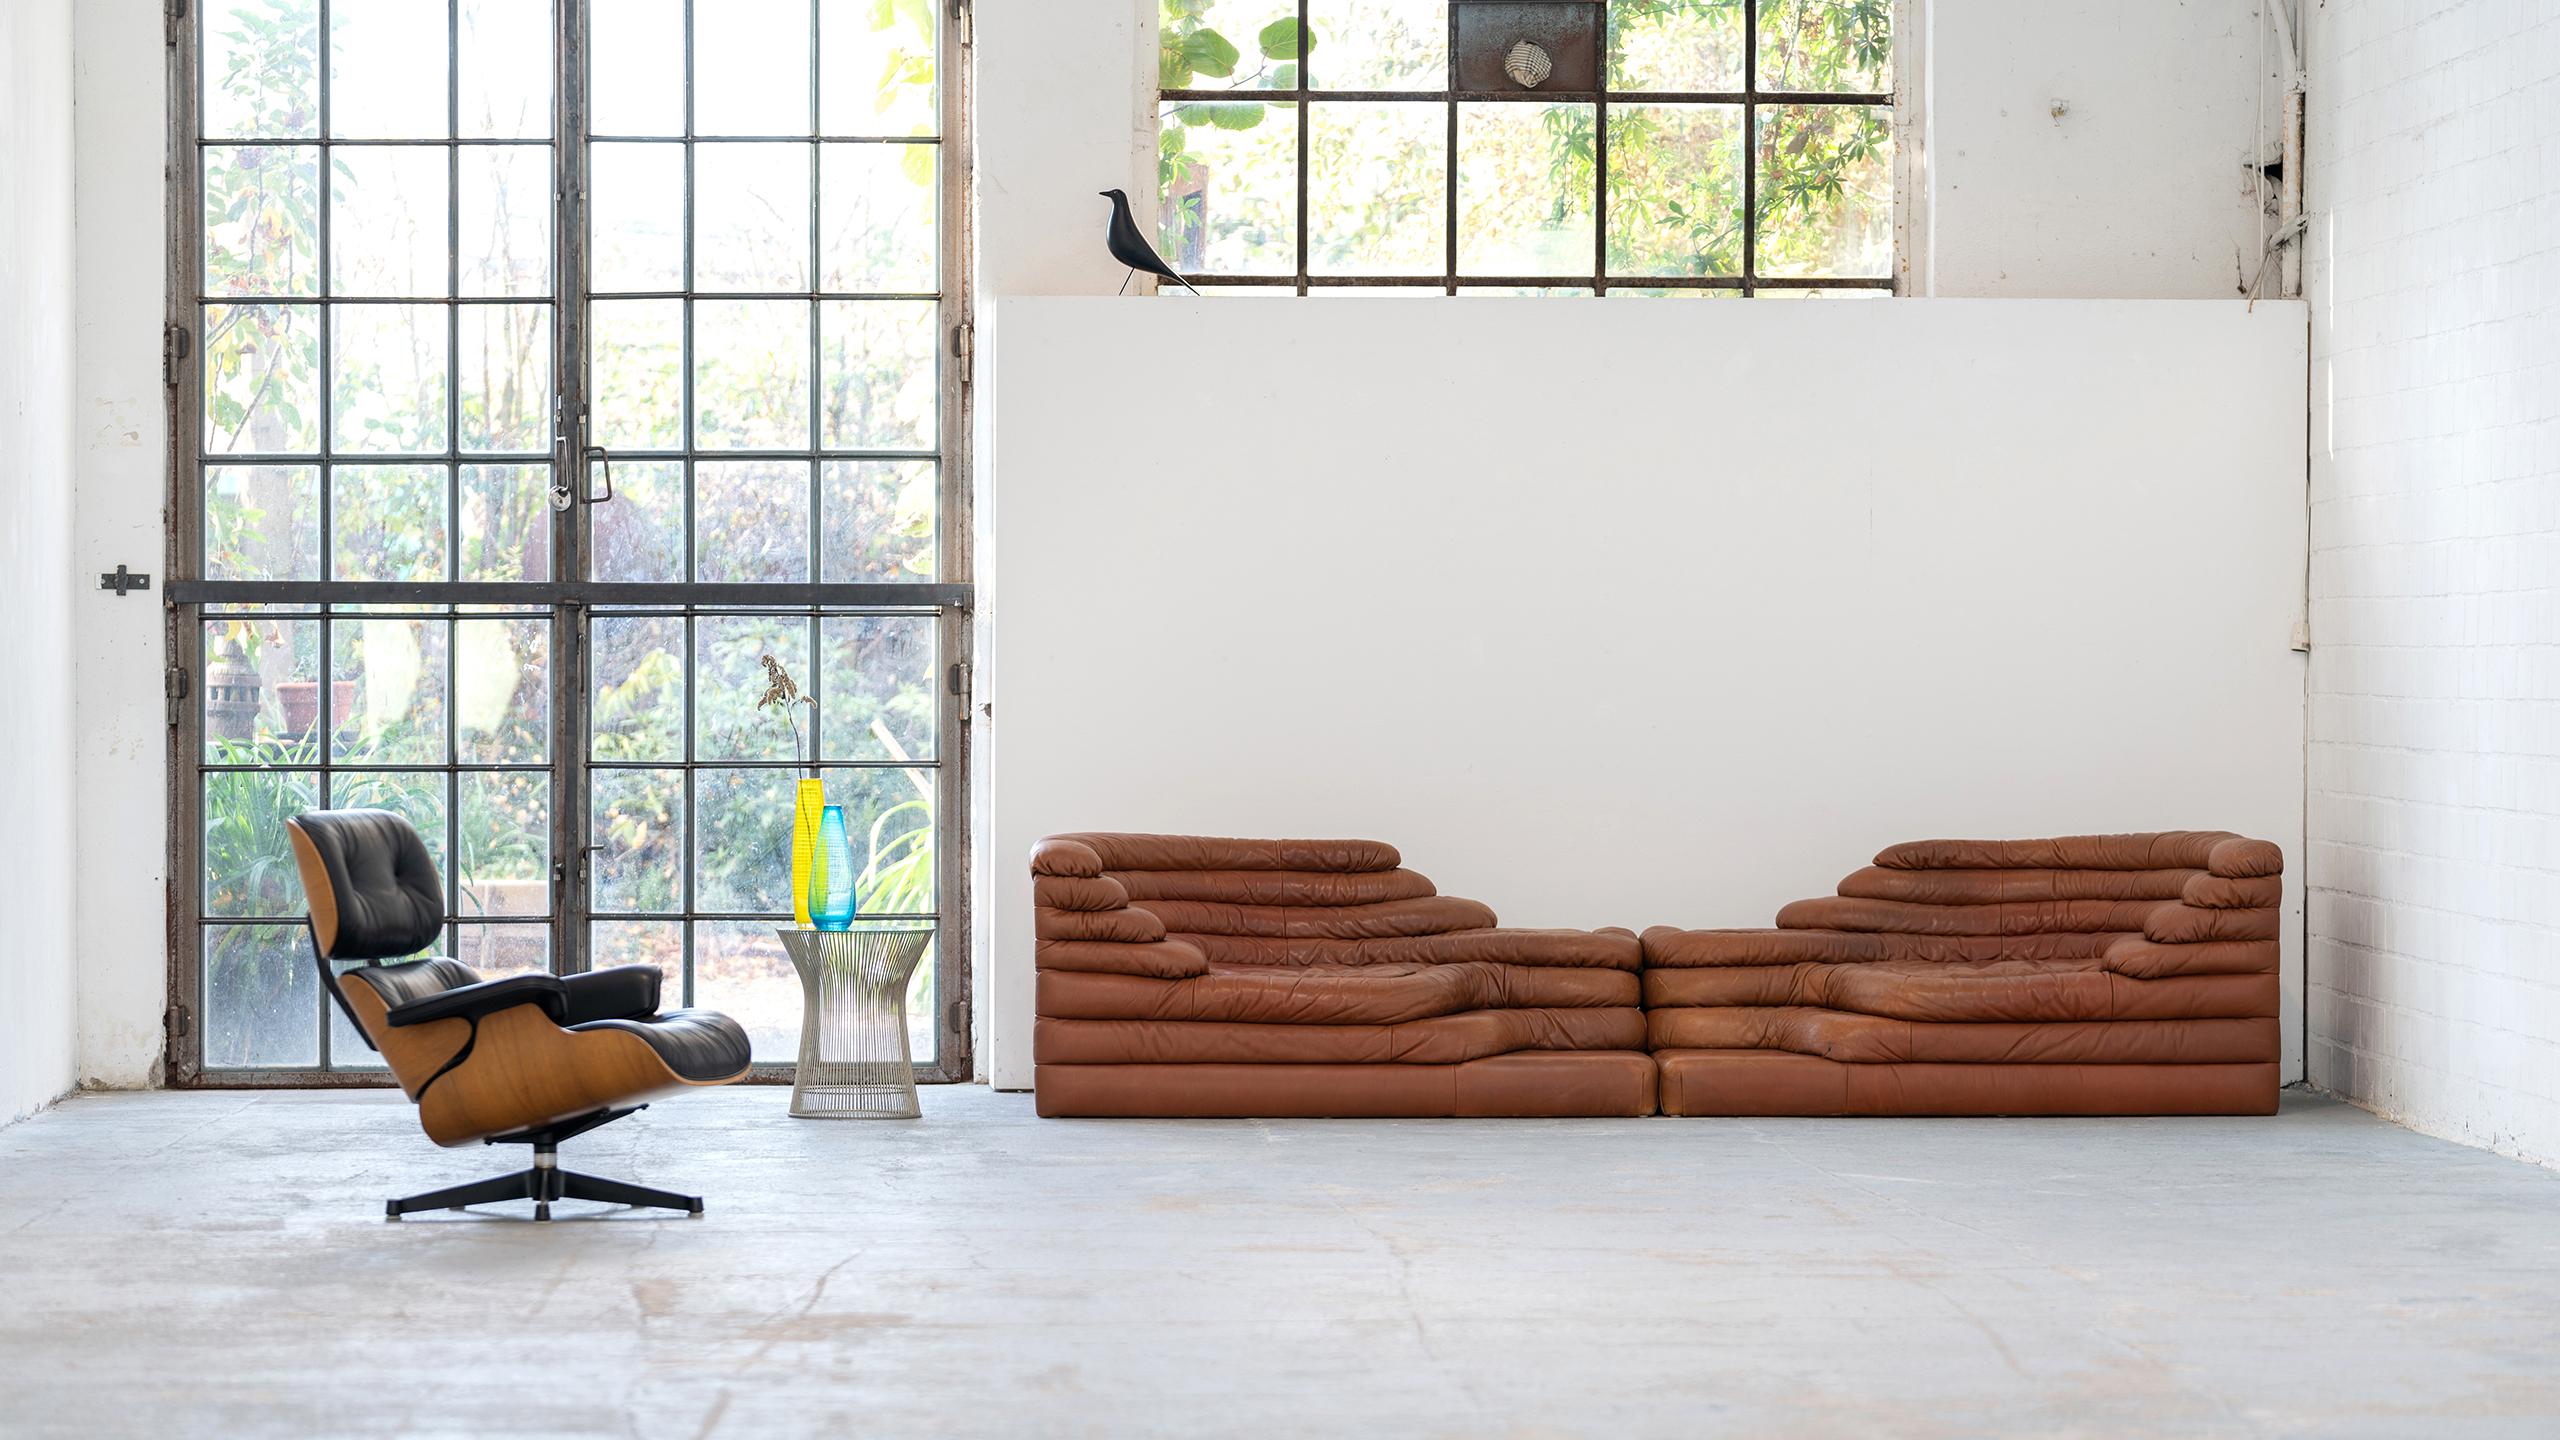 2x De Sede Terrazza sofas, model DS 1025 in leather.
Designed in 1972 by Ubald Klug & Ueli Berger for De Sede, Switzerland.

Sophisticated design sofa elements form the perfect basis for implementing your own interior design and furnishing